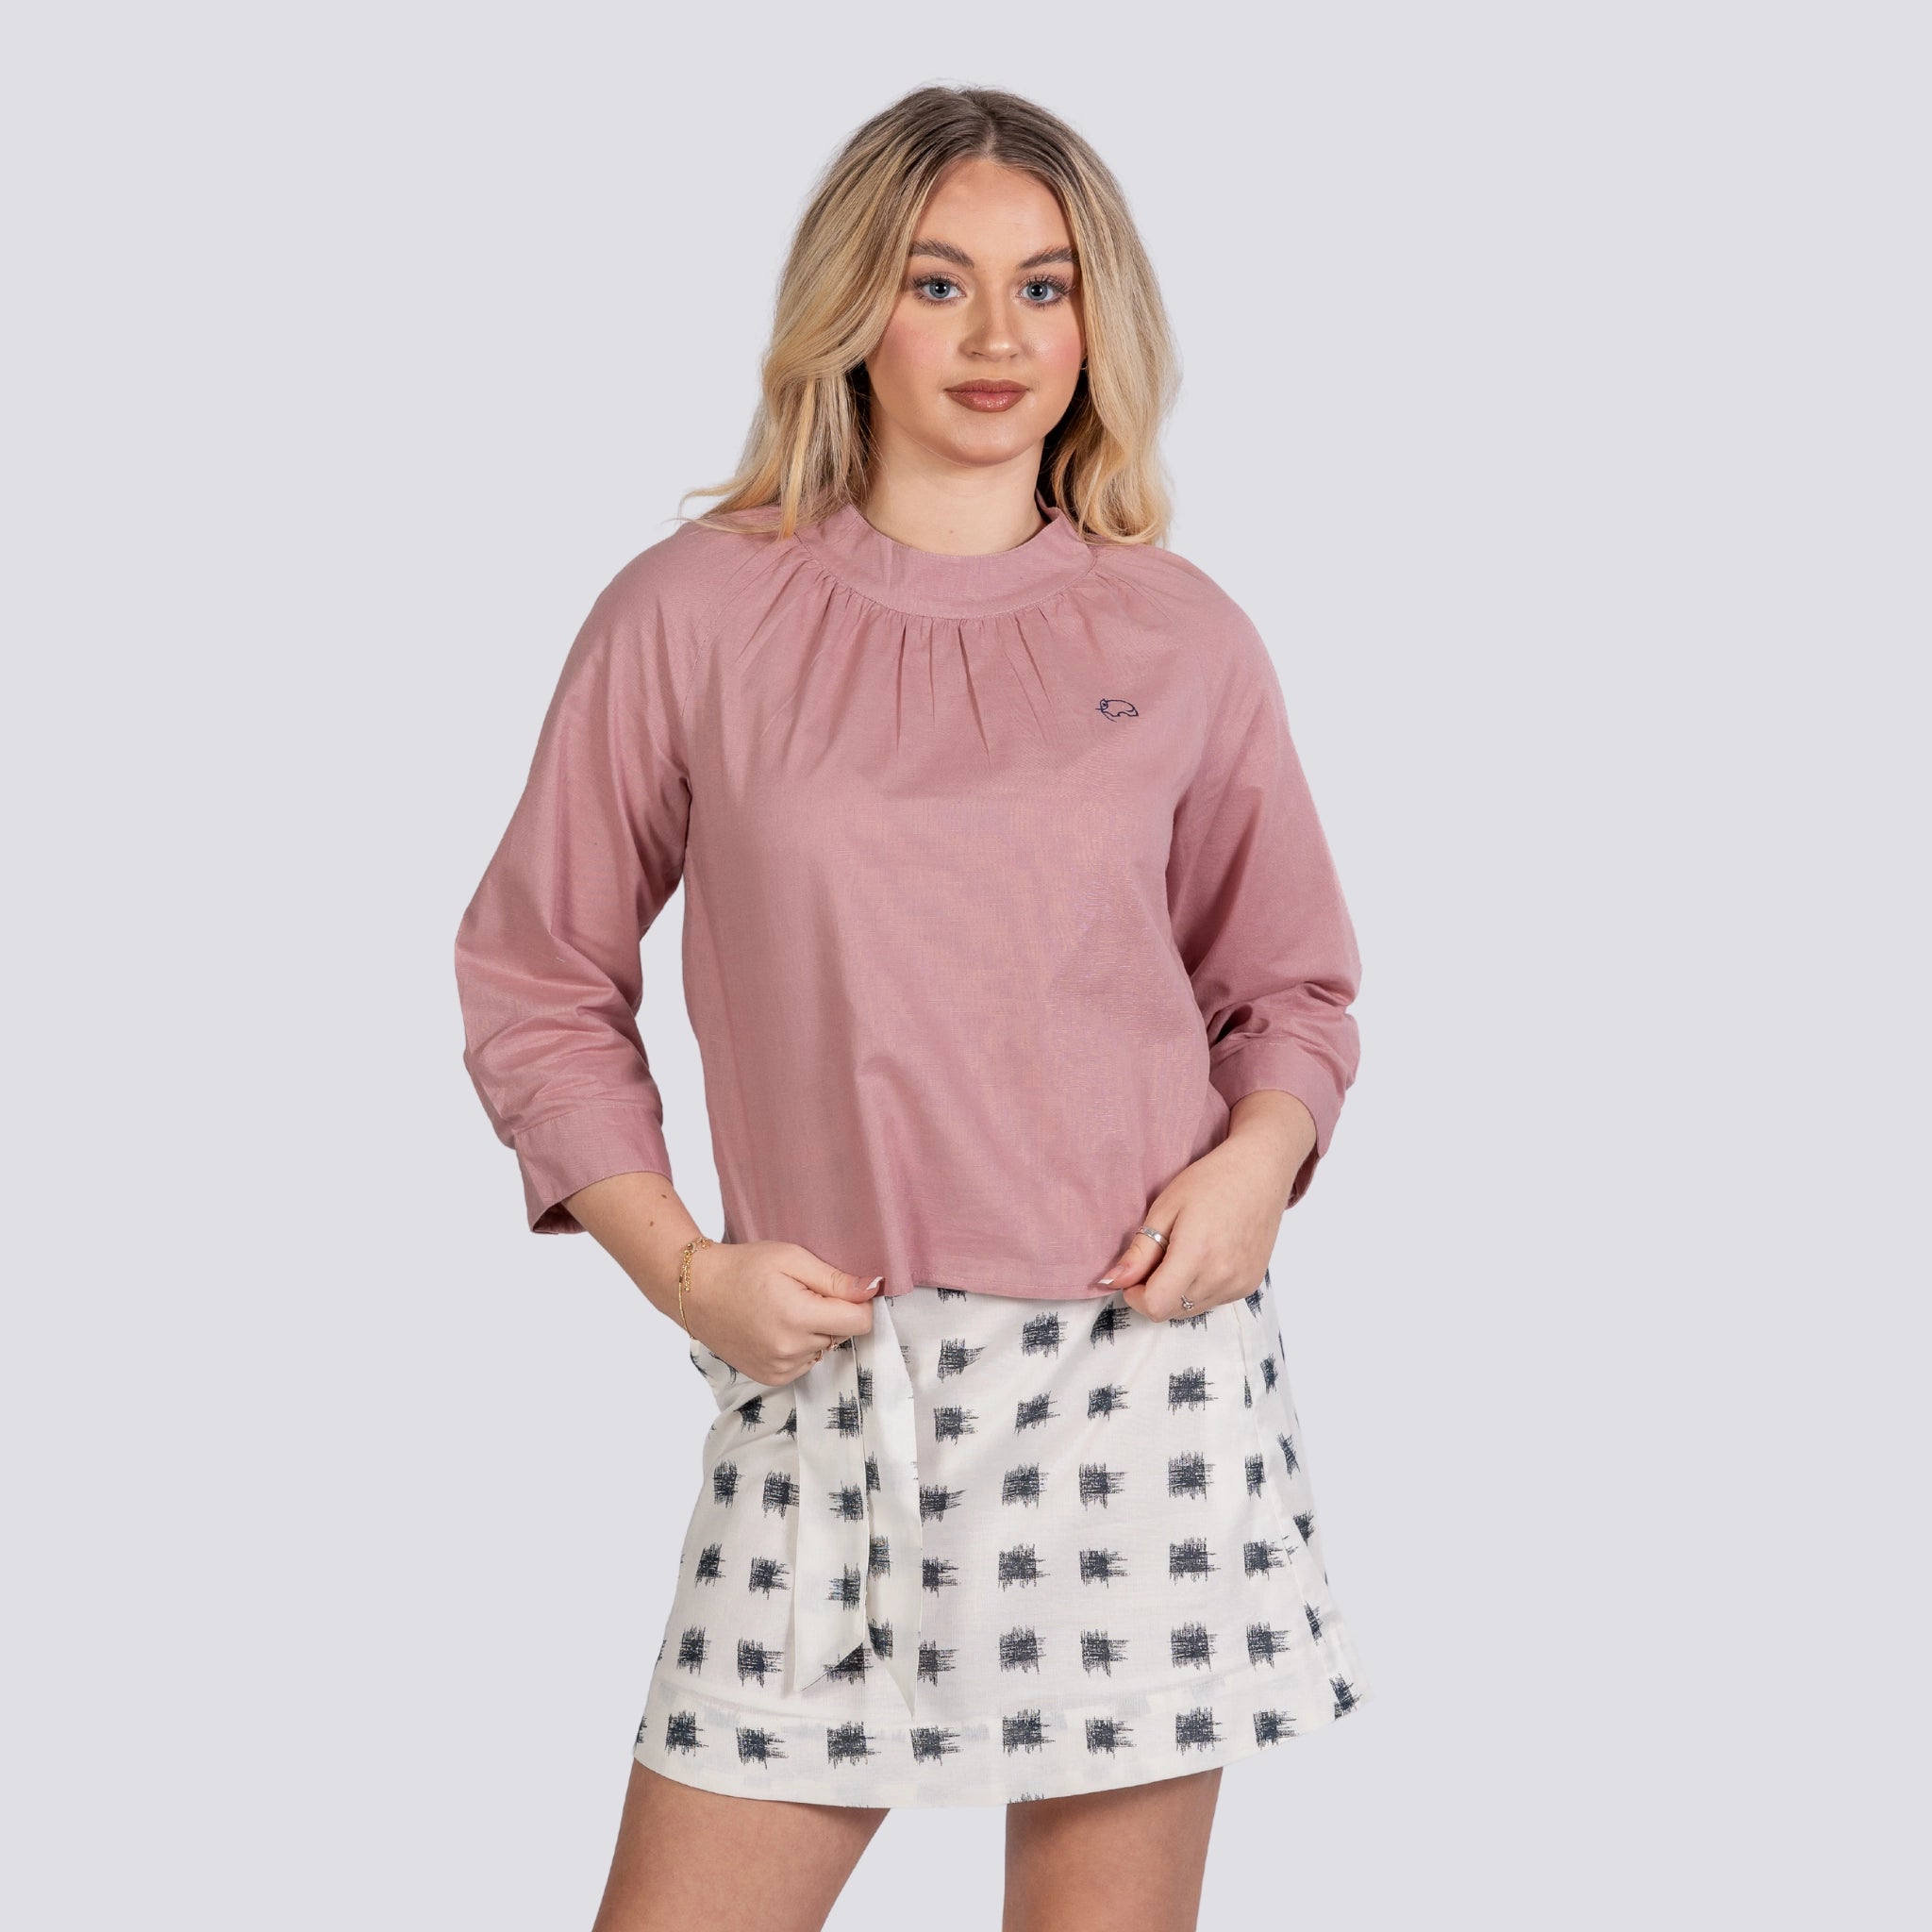 A woman in a pink blouse and a Karee Aqua Haze Elegance Linen Cotton Skirt For Women stands confidently against a gray background.